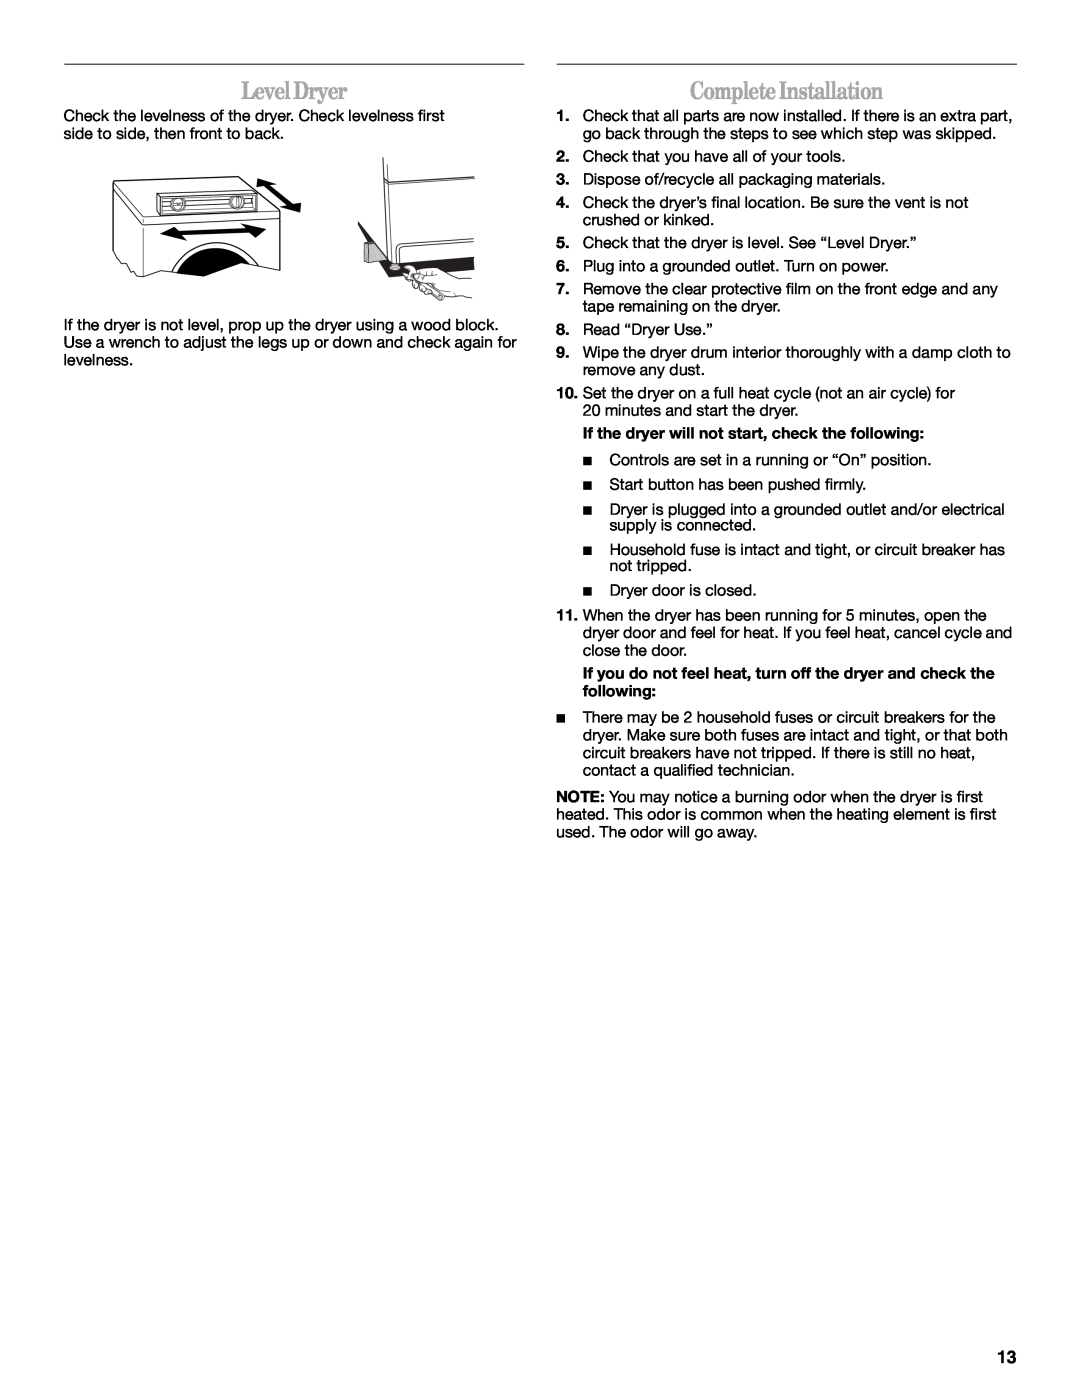 Whirlpool 8578567 manual Level Dryer, Complete Installation, If the dryer will not start, check the following 